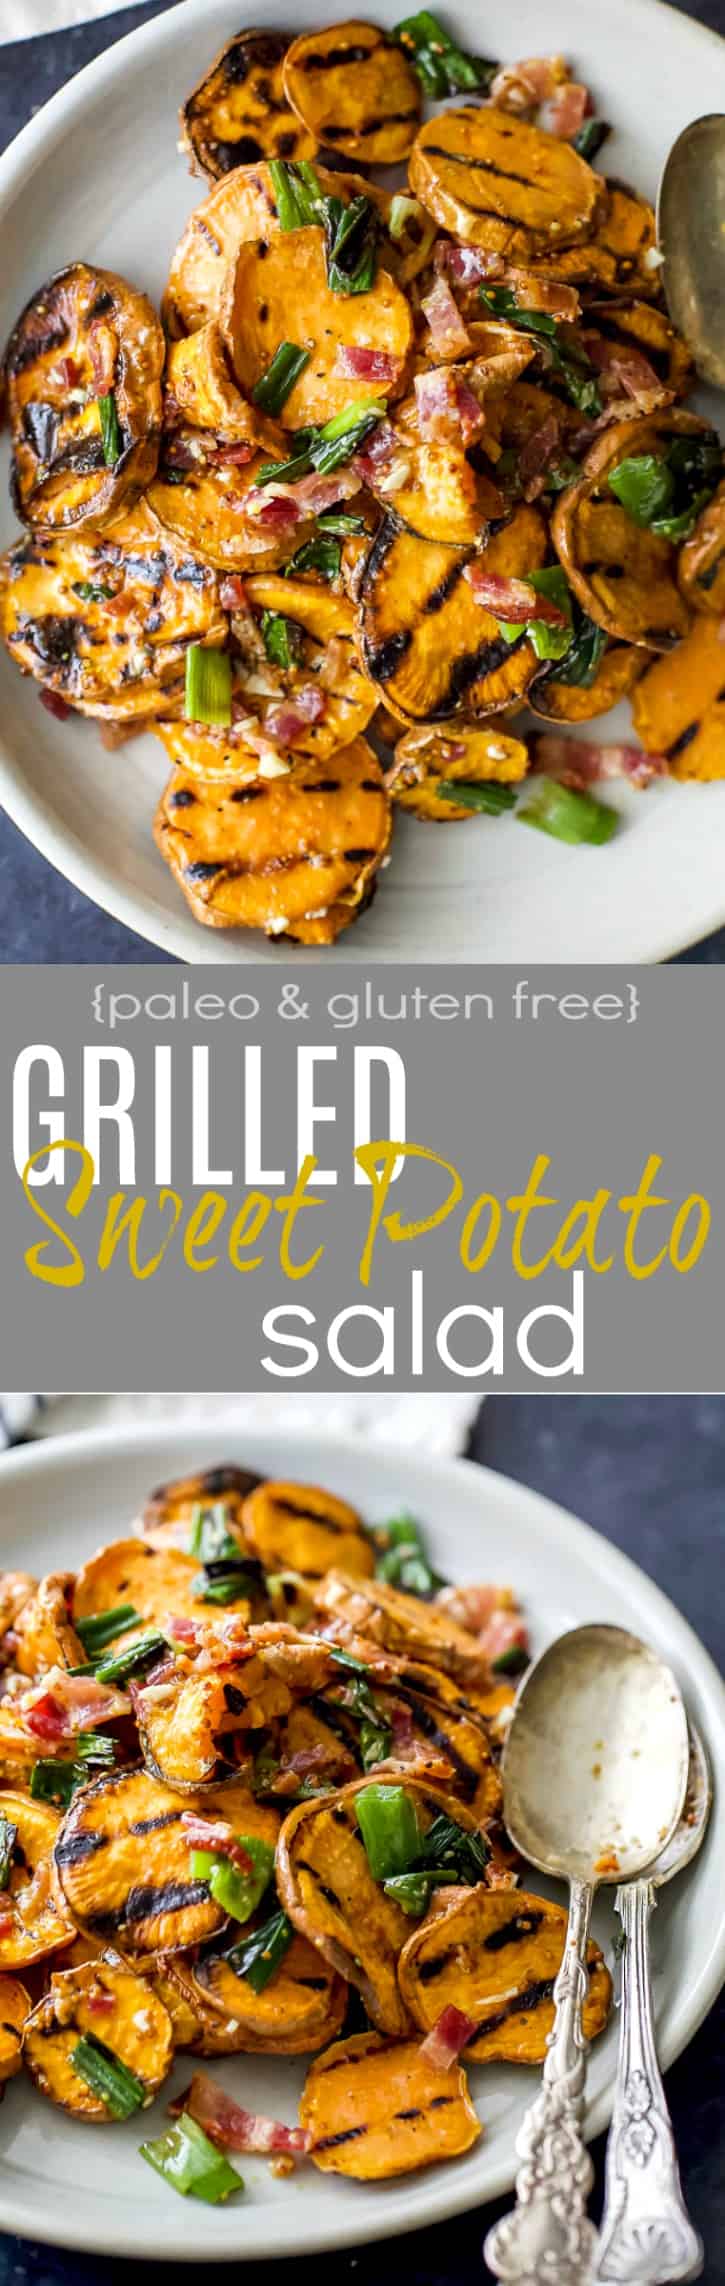 Recipe collage for GRILLED SWEET POTATO SALAD